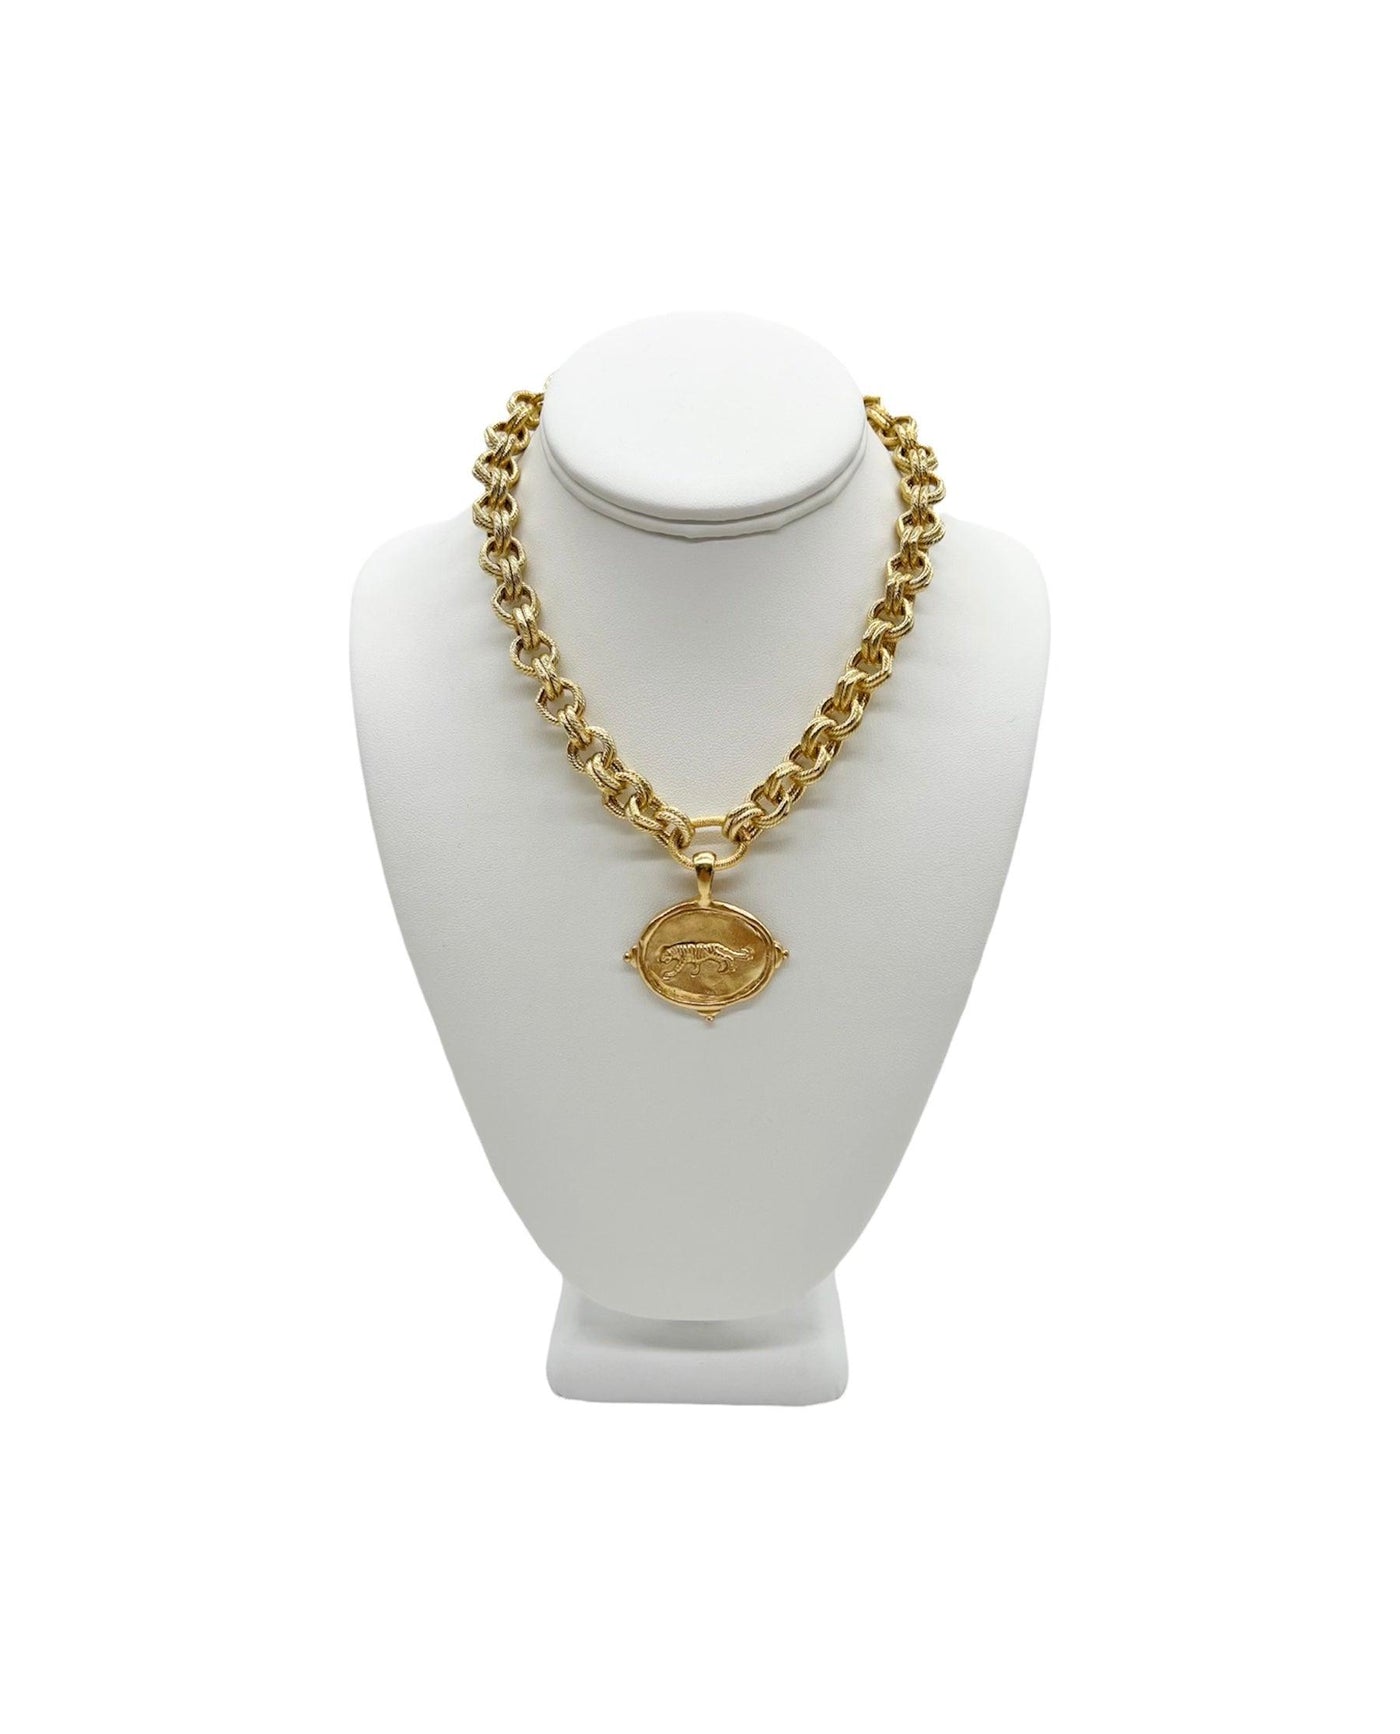 large double chain linked necklace with large three studded drop pendant with a detailed tiger on a white neck display